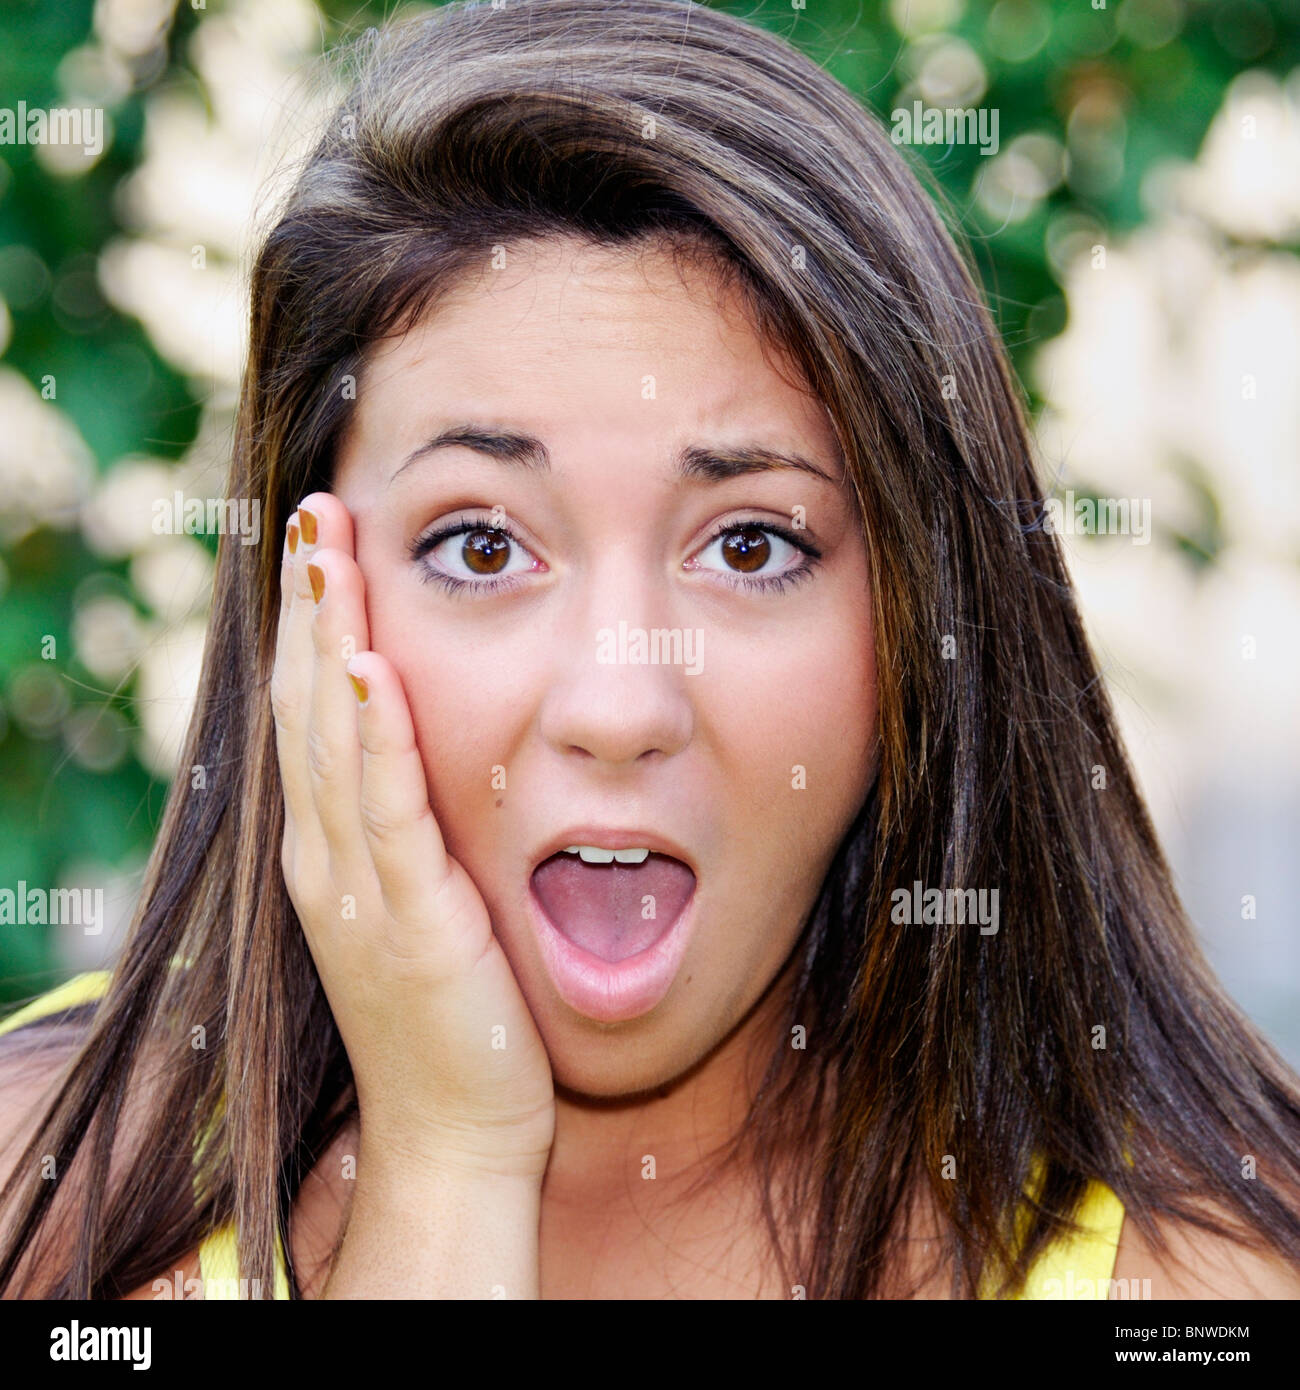 Closeup of a teenage girl's face showing shock and unhappy surprise. Brunette, Caucasian, brown eyes. Outdoors. USA. Stock Photo